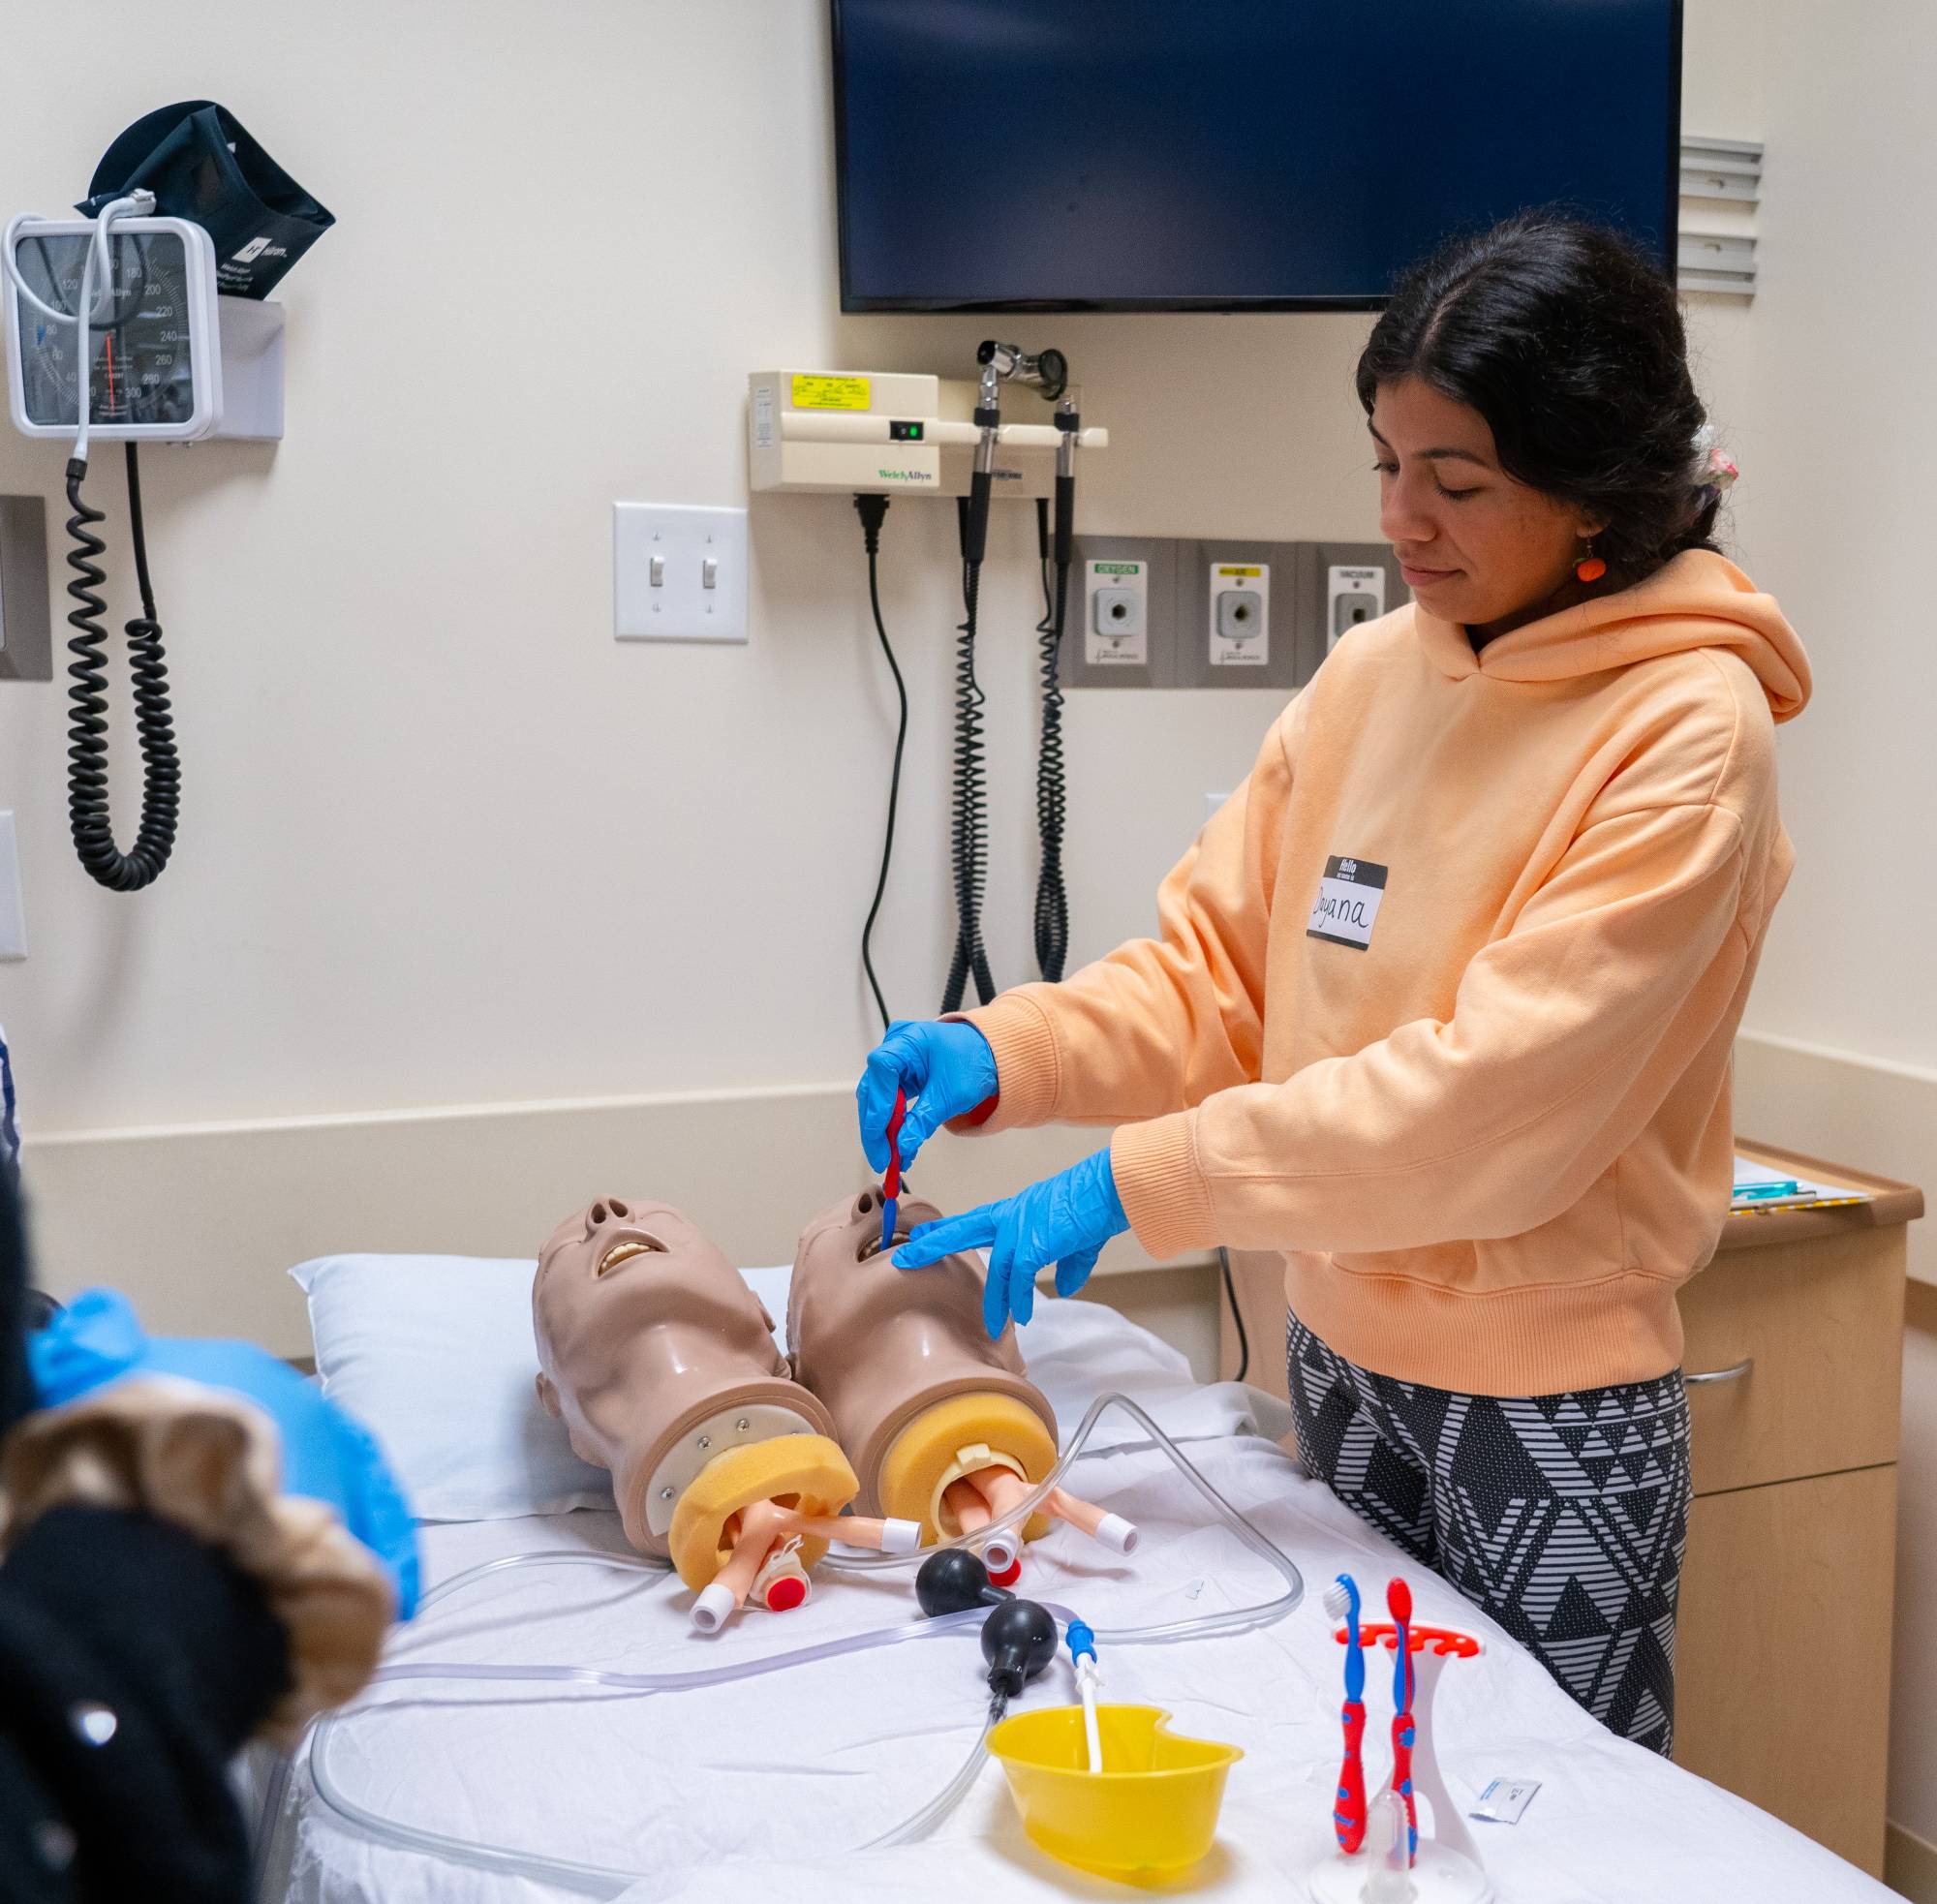 Students practicing oral care using suctioning system on a manikin head